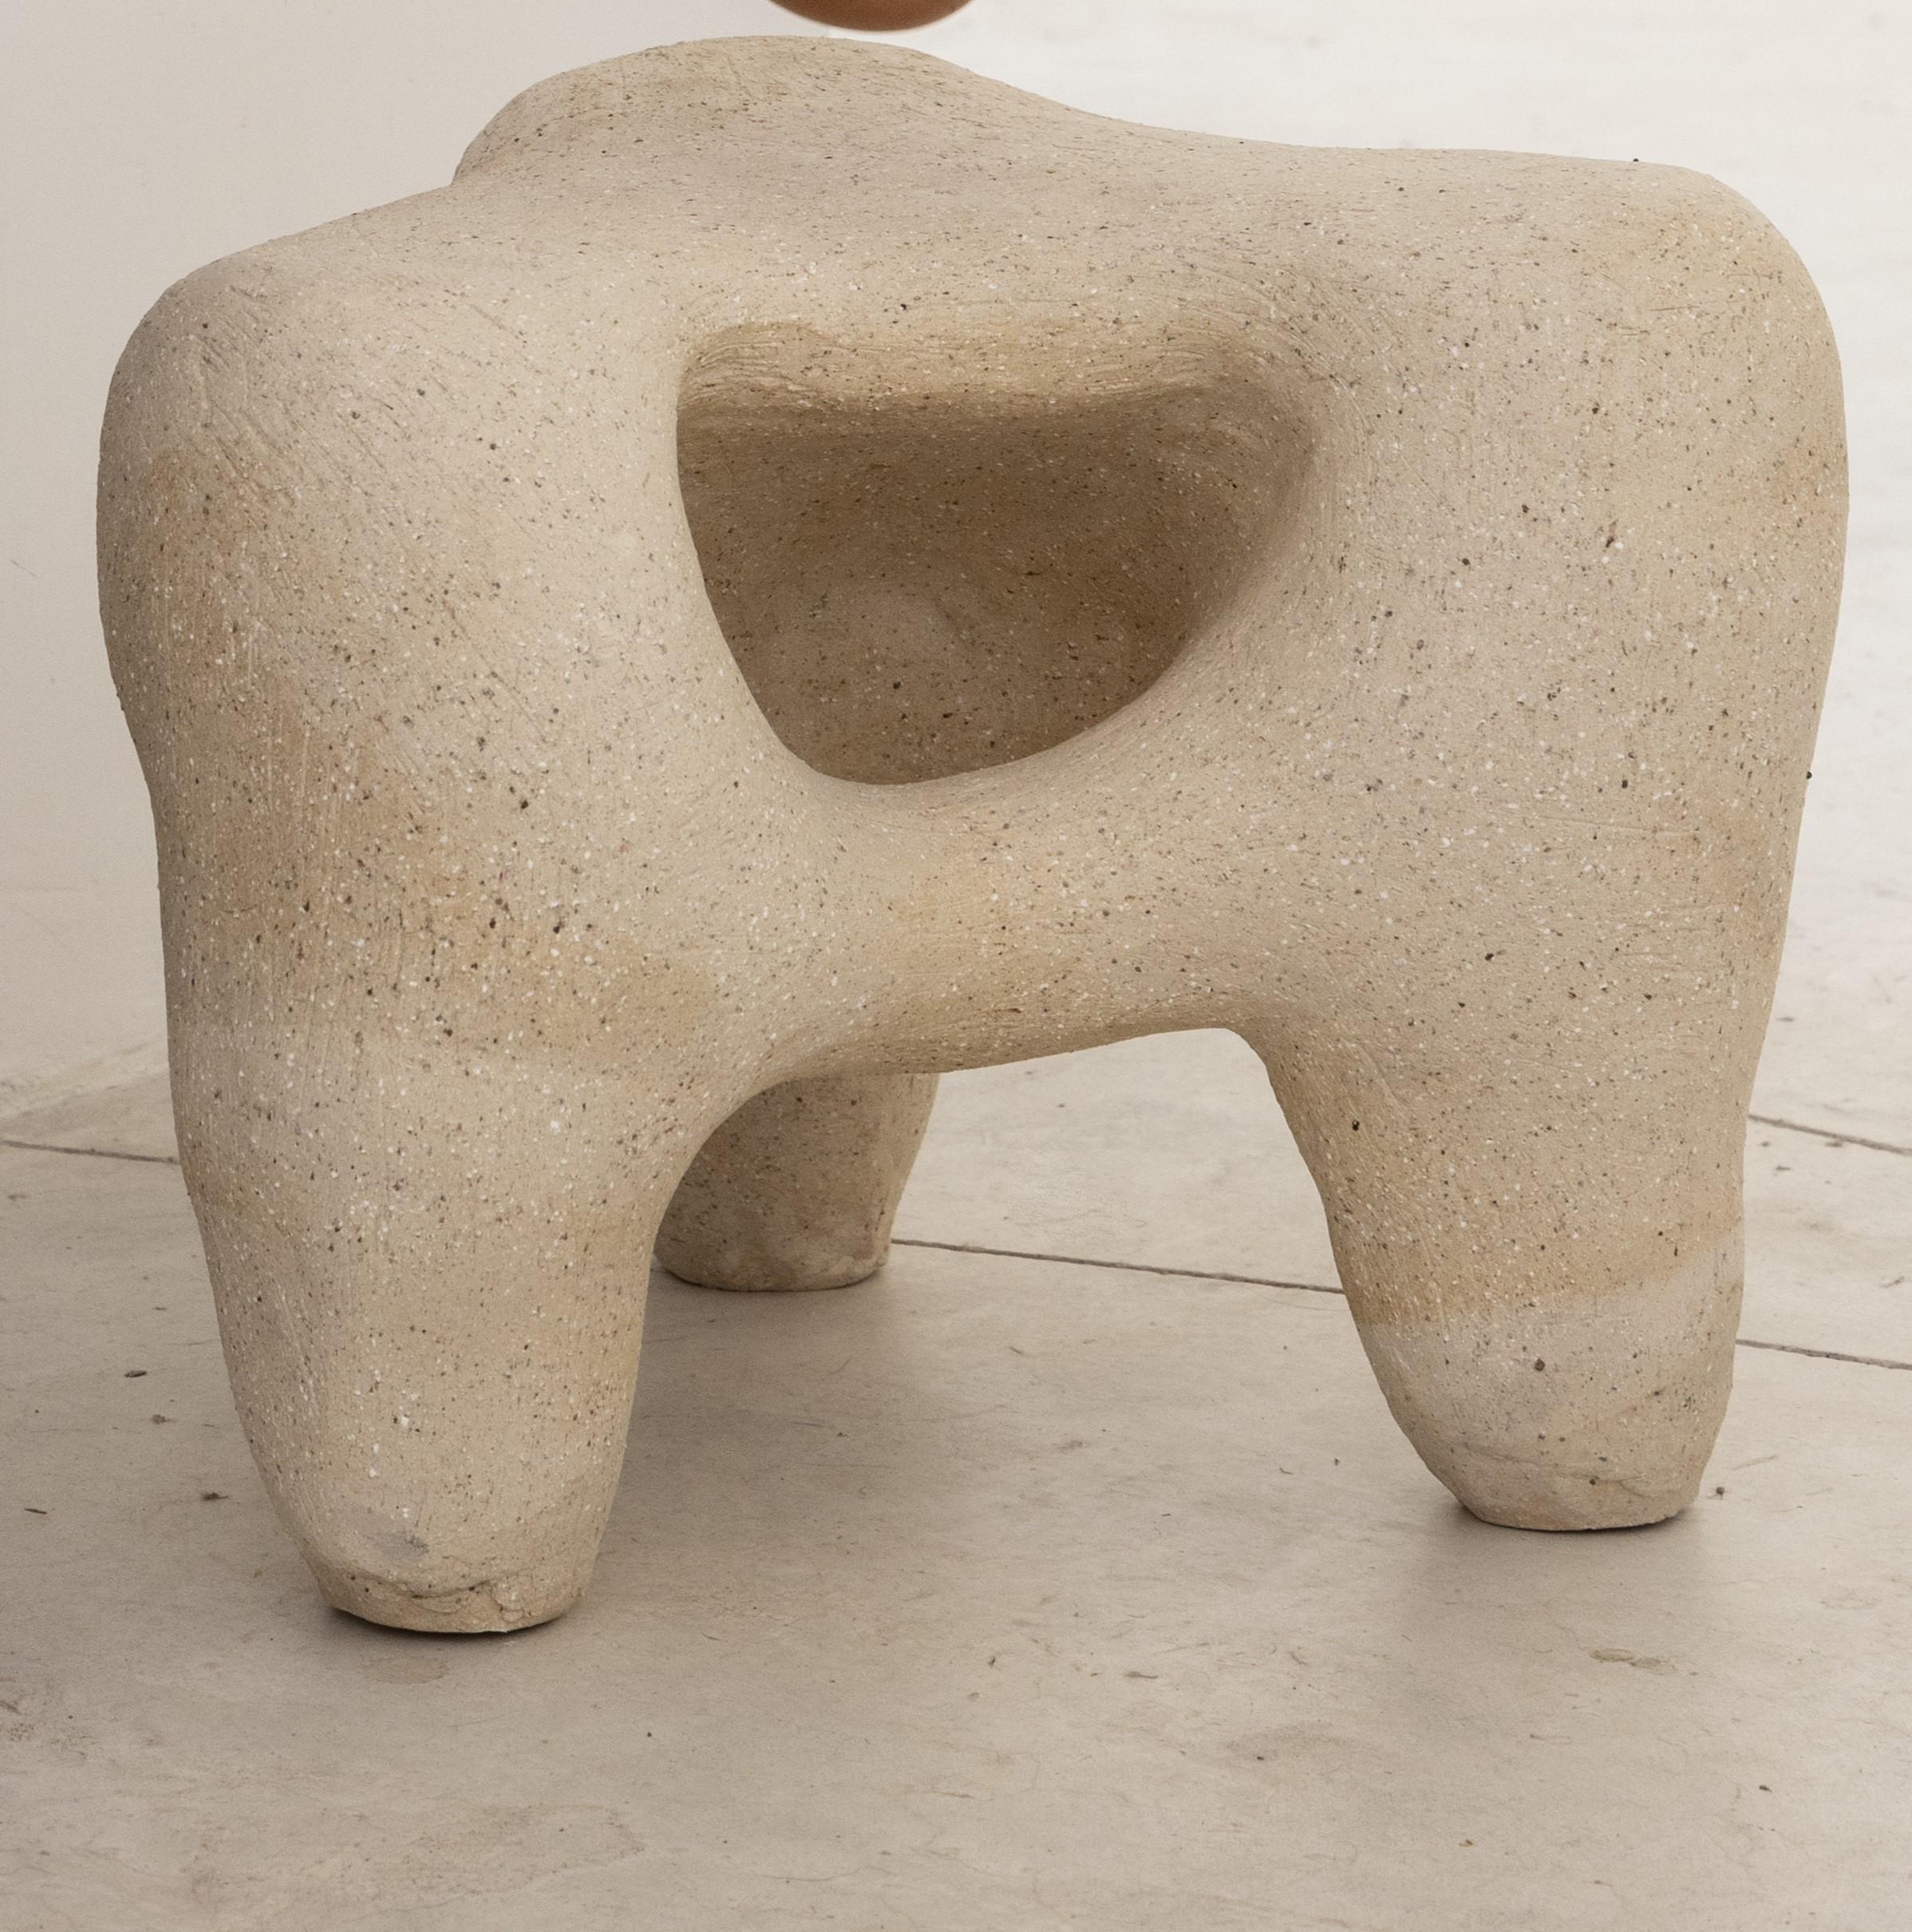 Ceramic stool by Camila Apaez
Unique piece.
Materials: stoneware.
Dimensions: D 37 x W 29 x H 30 cm.

Ila Ceramica emerged from a process of inner inquiry where ceramics became a space for presence, silence, touch and patience. Camila